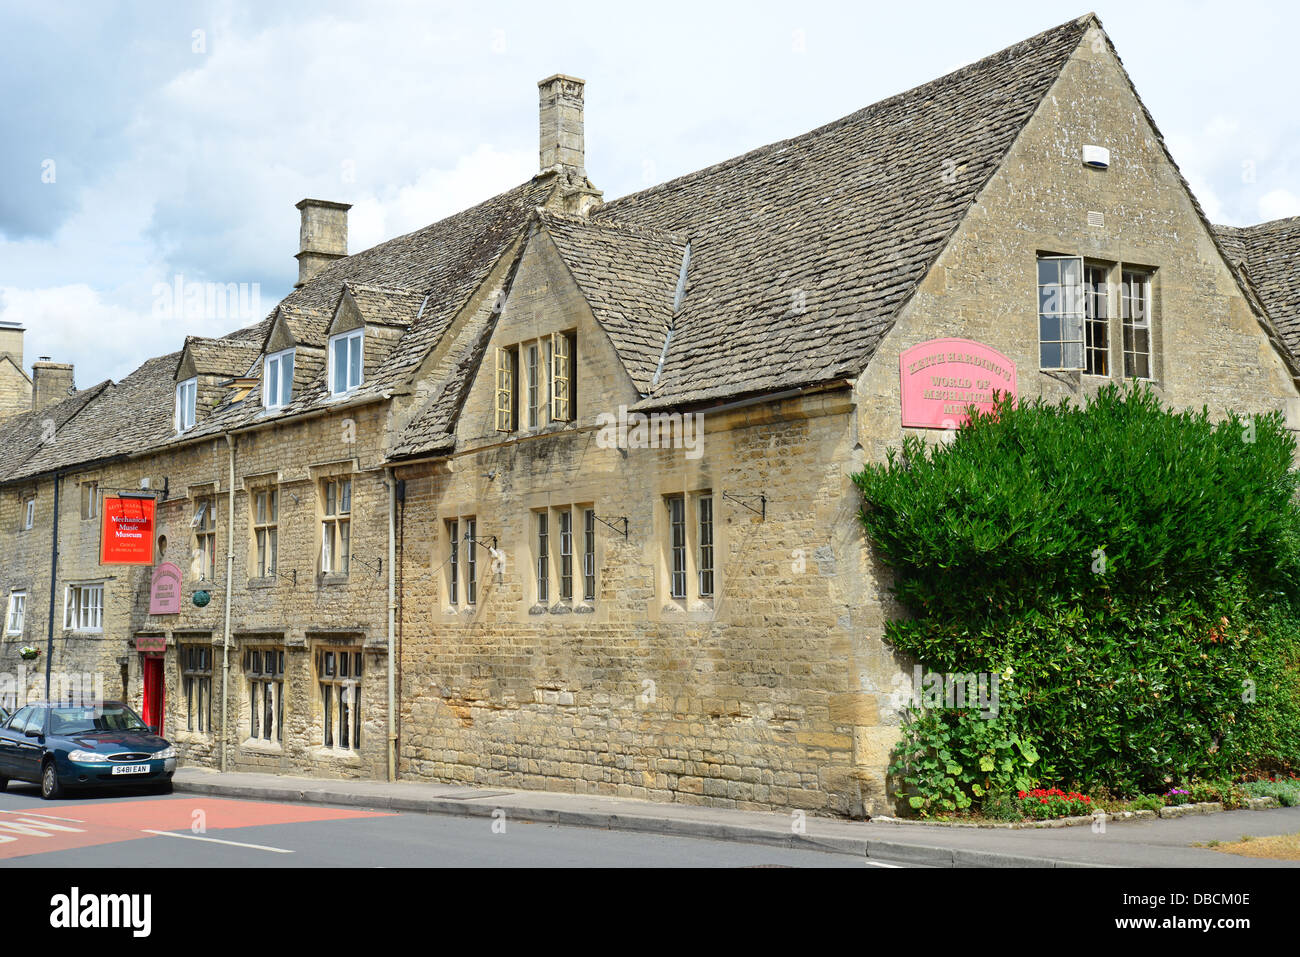 Keith Harding's World of mechanical music, High Street, Northleach, Cotswolds, Gloucestershire, Angleterre, Royaume-Uni Banque D'Images